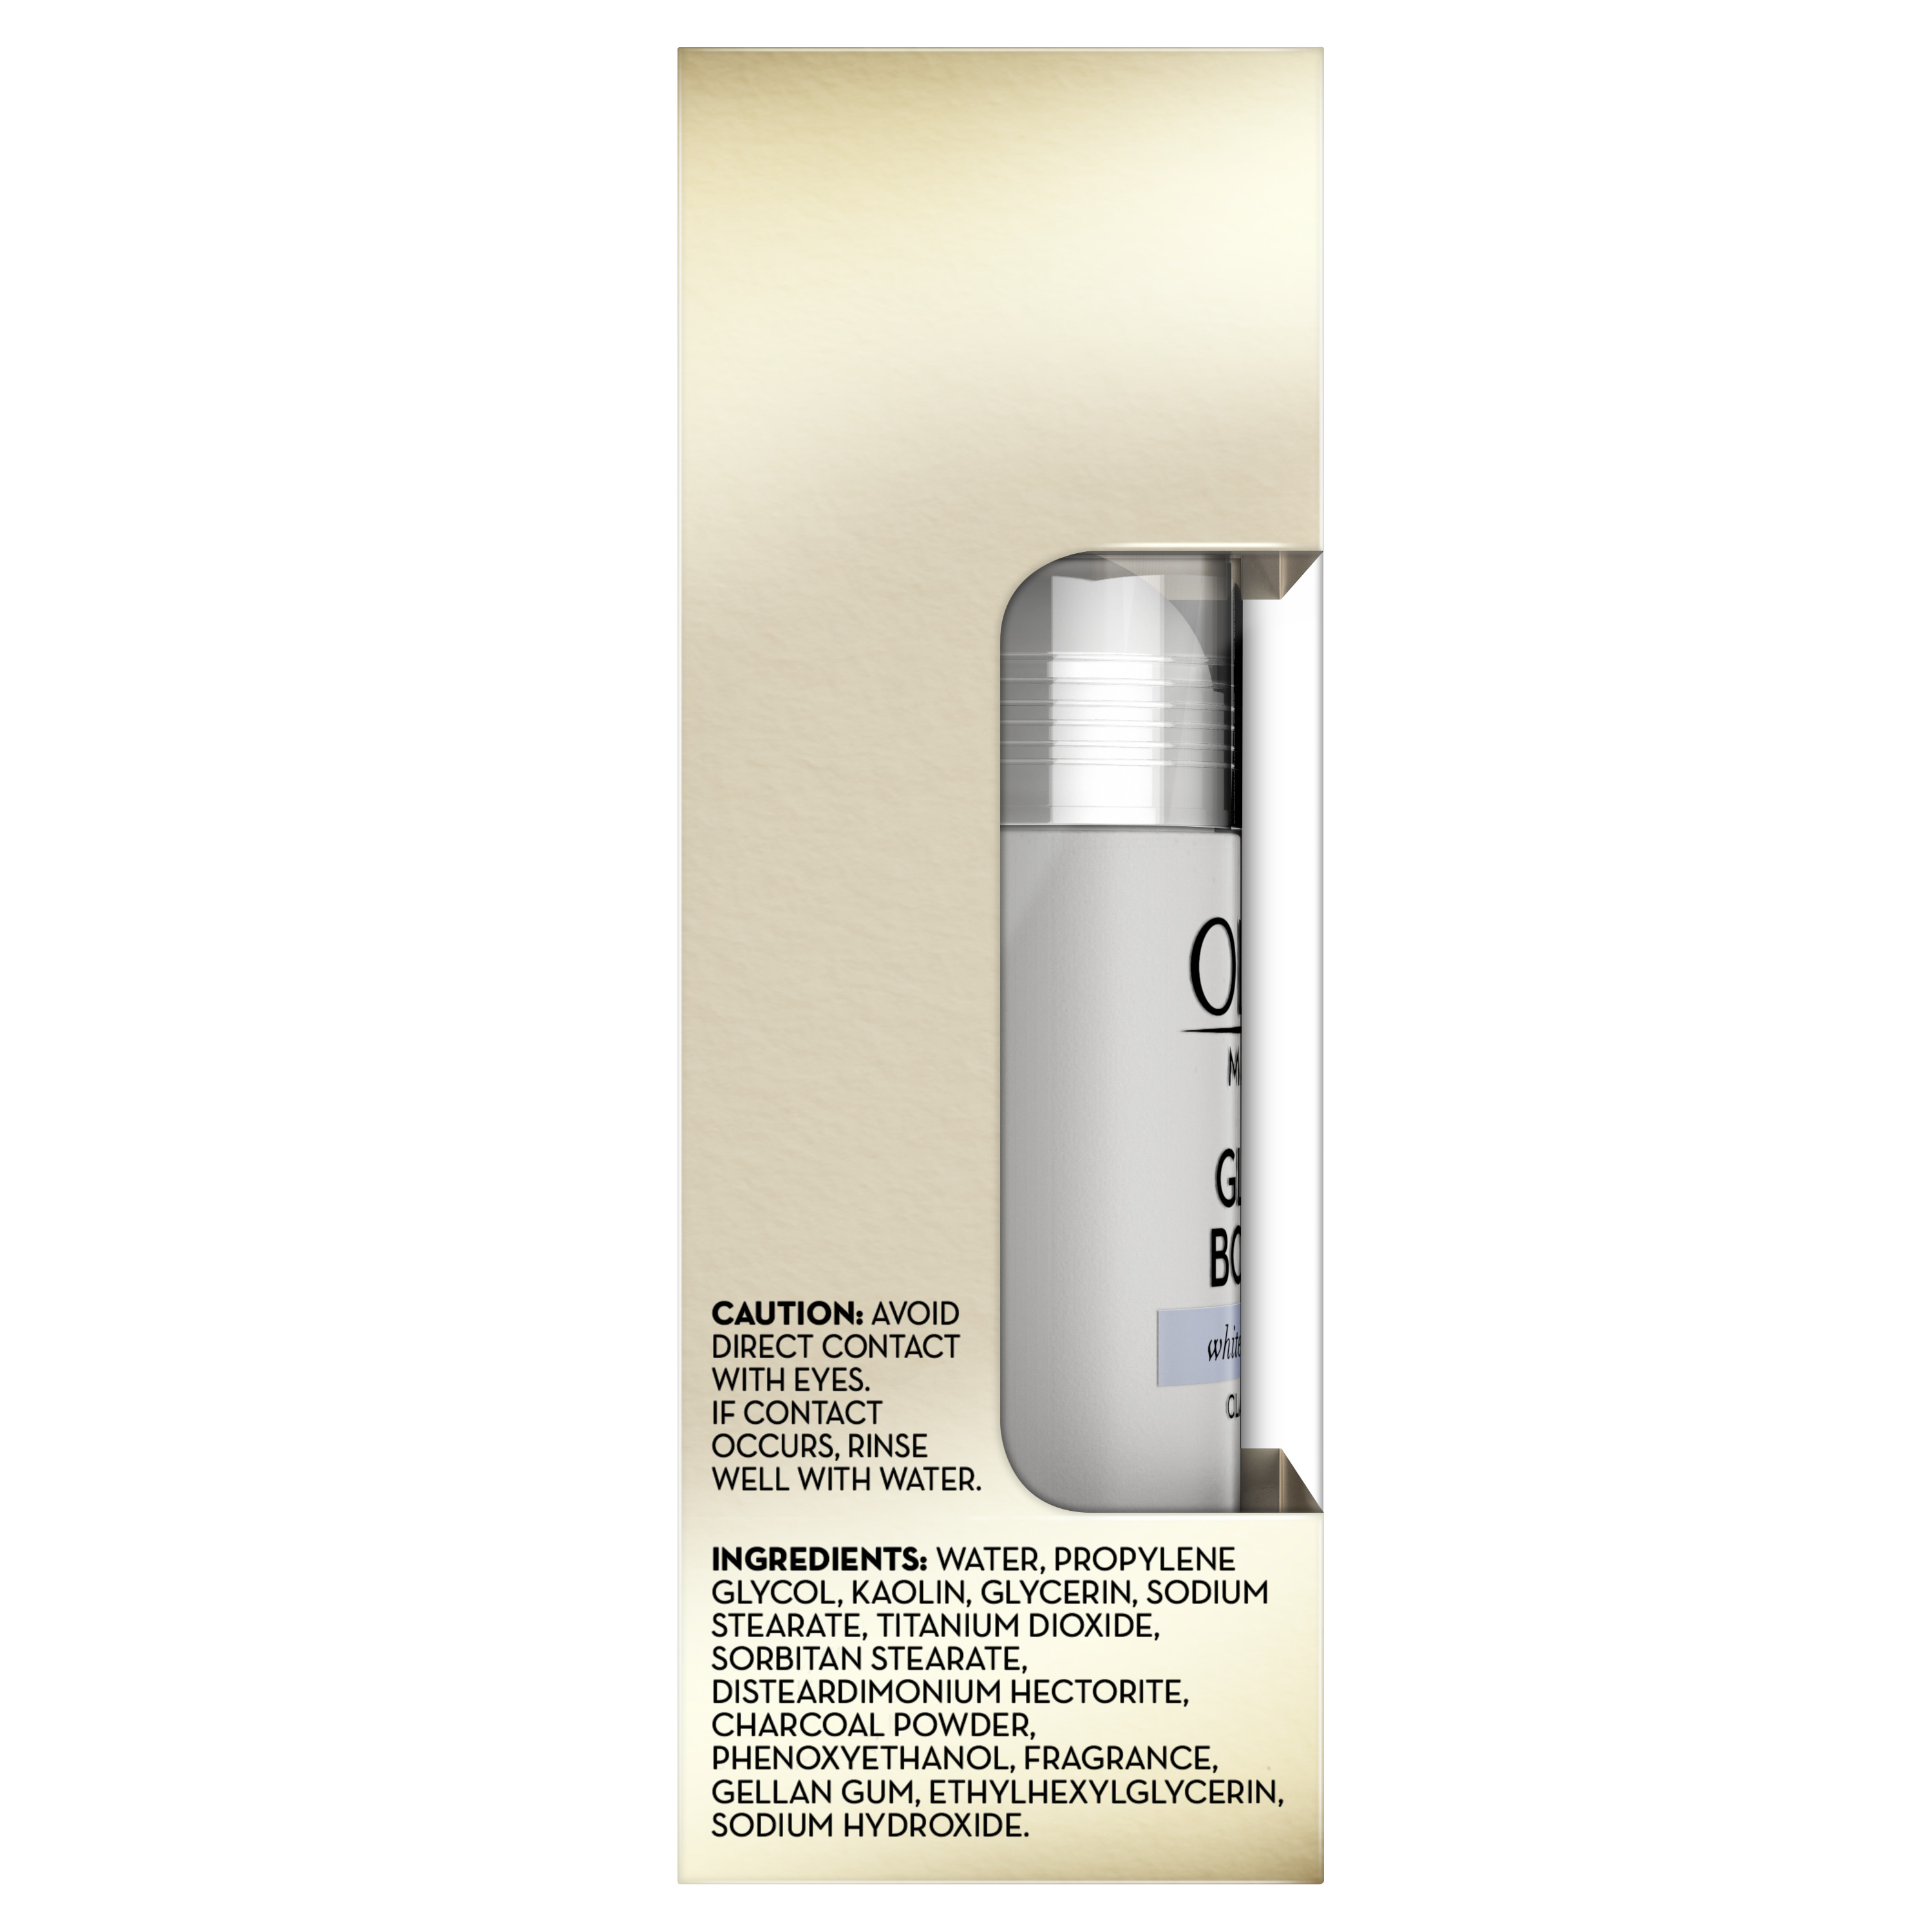 Olay Face Mask Stick, Glow Boost with White Charcoal Clay, 1.7 oz - image 9 of 9